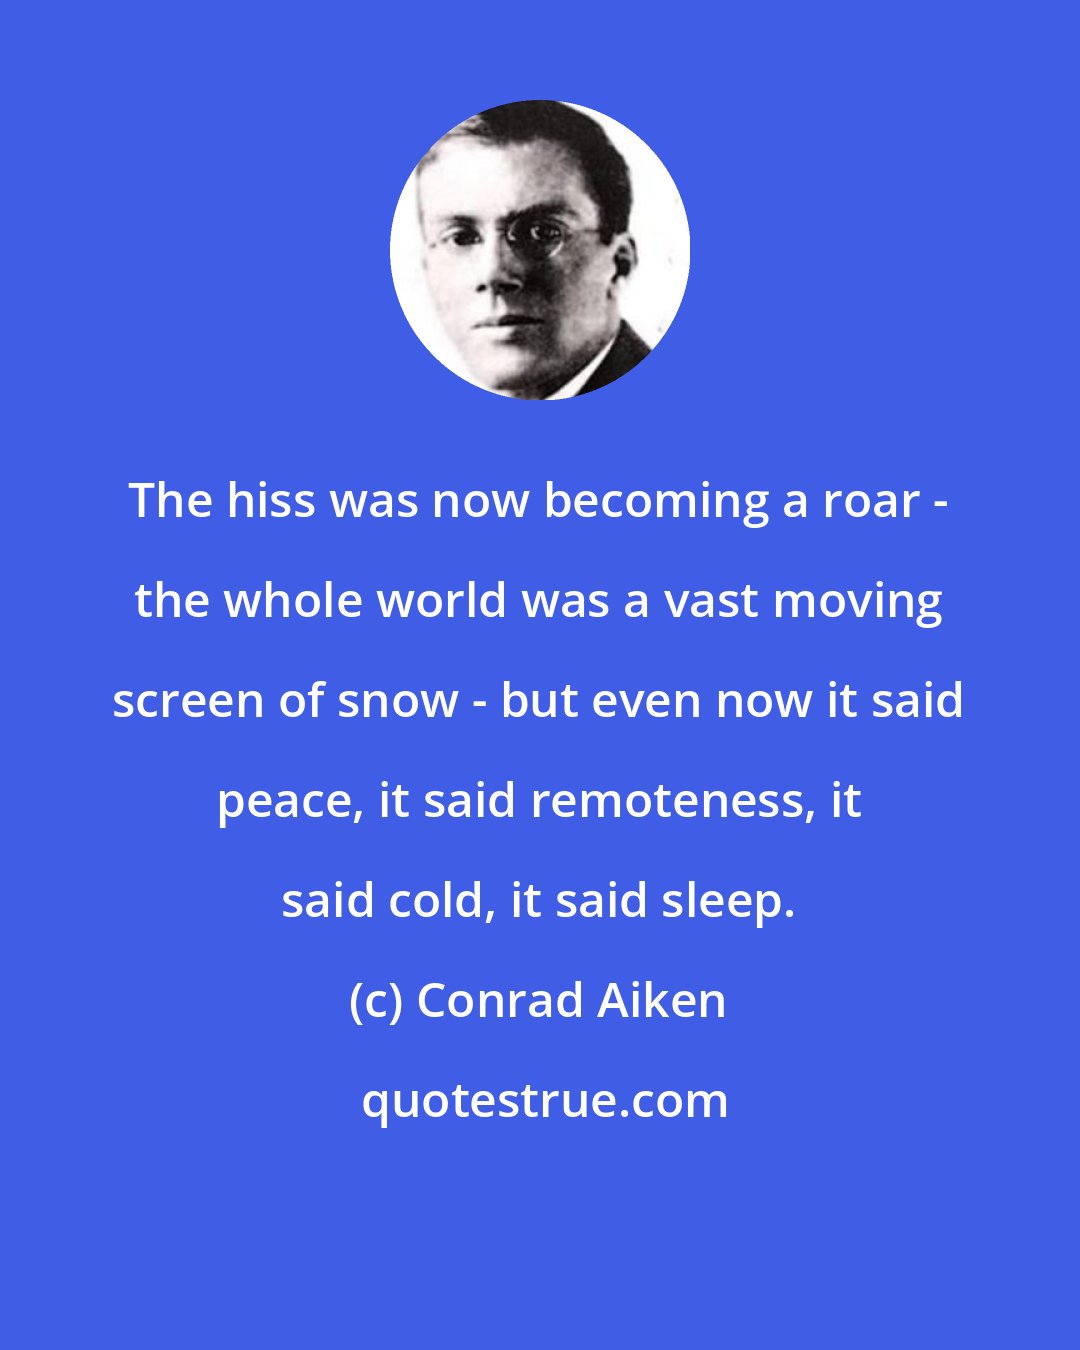 Conrad Aiken: The hiss was now becoming a roar - the whole world was a vast moving screen of snow - but even now it said peace, it said remoteness, it said cold, it said sleep.